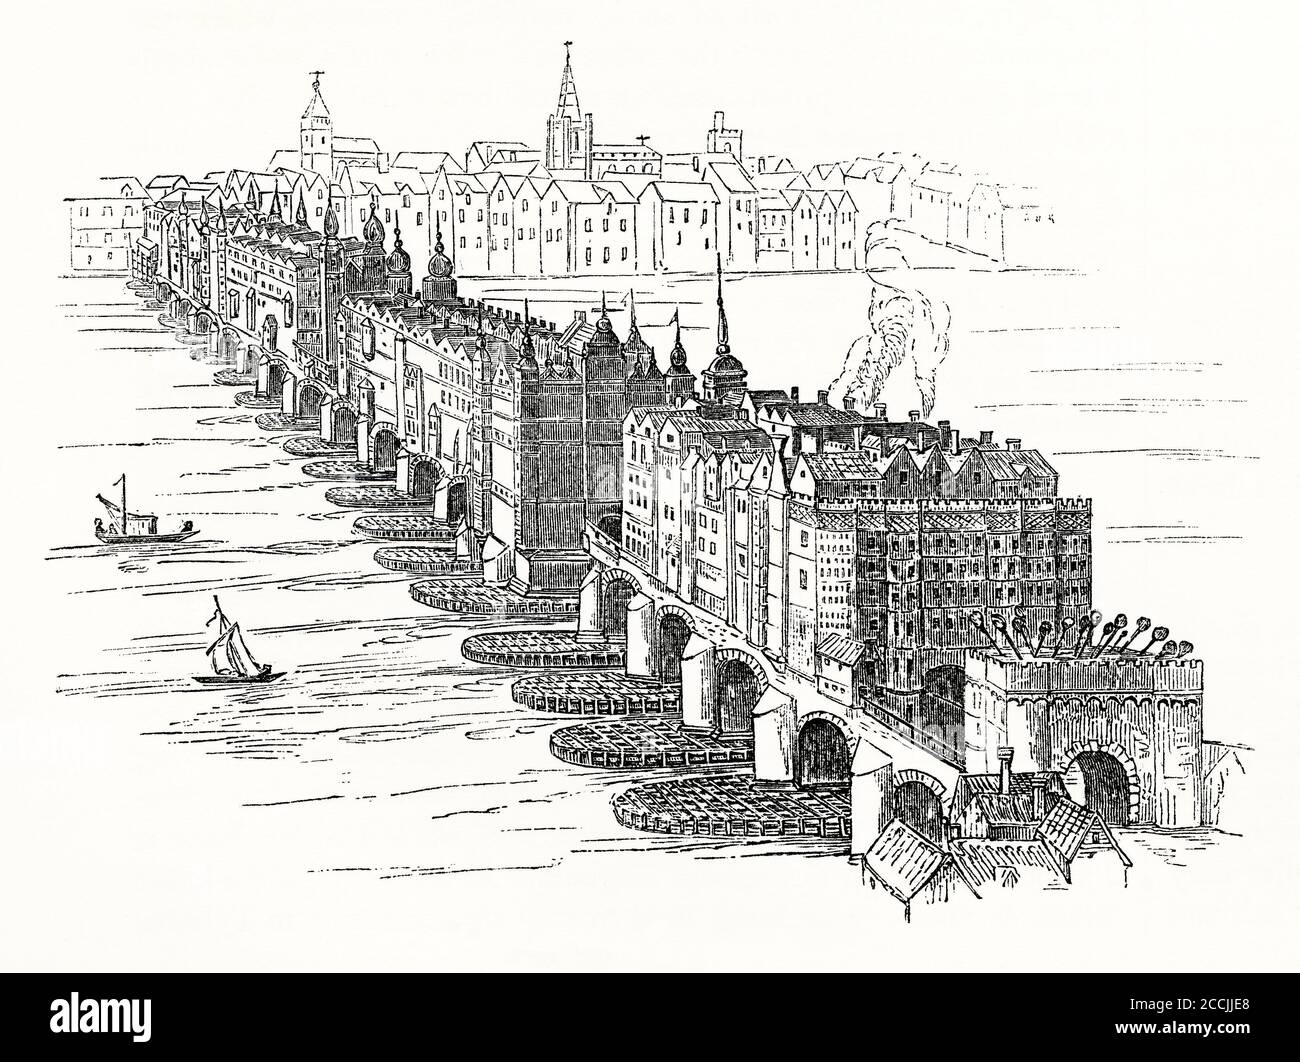 An old engraving of London Bridge c. 1650 depicting the medieval bridge with buildings from end to end. This stone-built medieval arched structure replaced earlier timber bridges. Work began in 1176. It was finished by 1209. It had a drawbridge to allow for the passage of tall ships, plus defensive gatehouses at both ends. By 1358 it had 138 shops on the bridge. The buildings on London Bridge were a major fire hazard. Traitors’ heads were displayed on spikes at the Stone Gateway on the south bank (bottom right). This began in about 1300 and continued until about 1660. Stock Photo